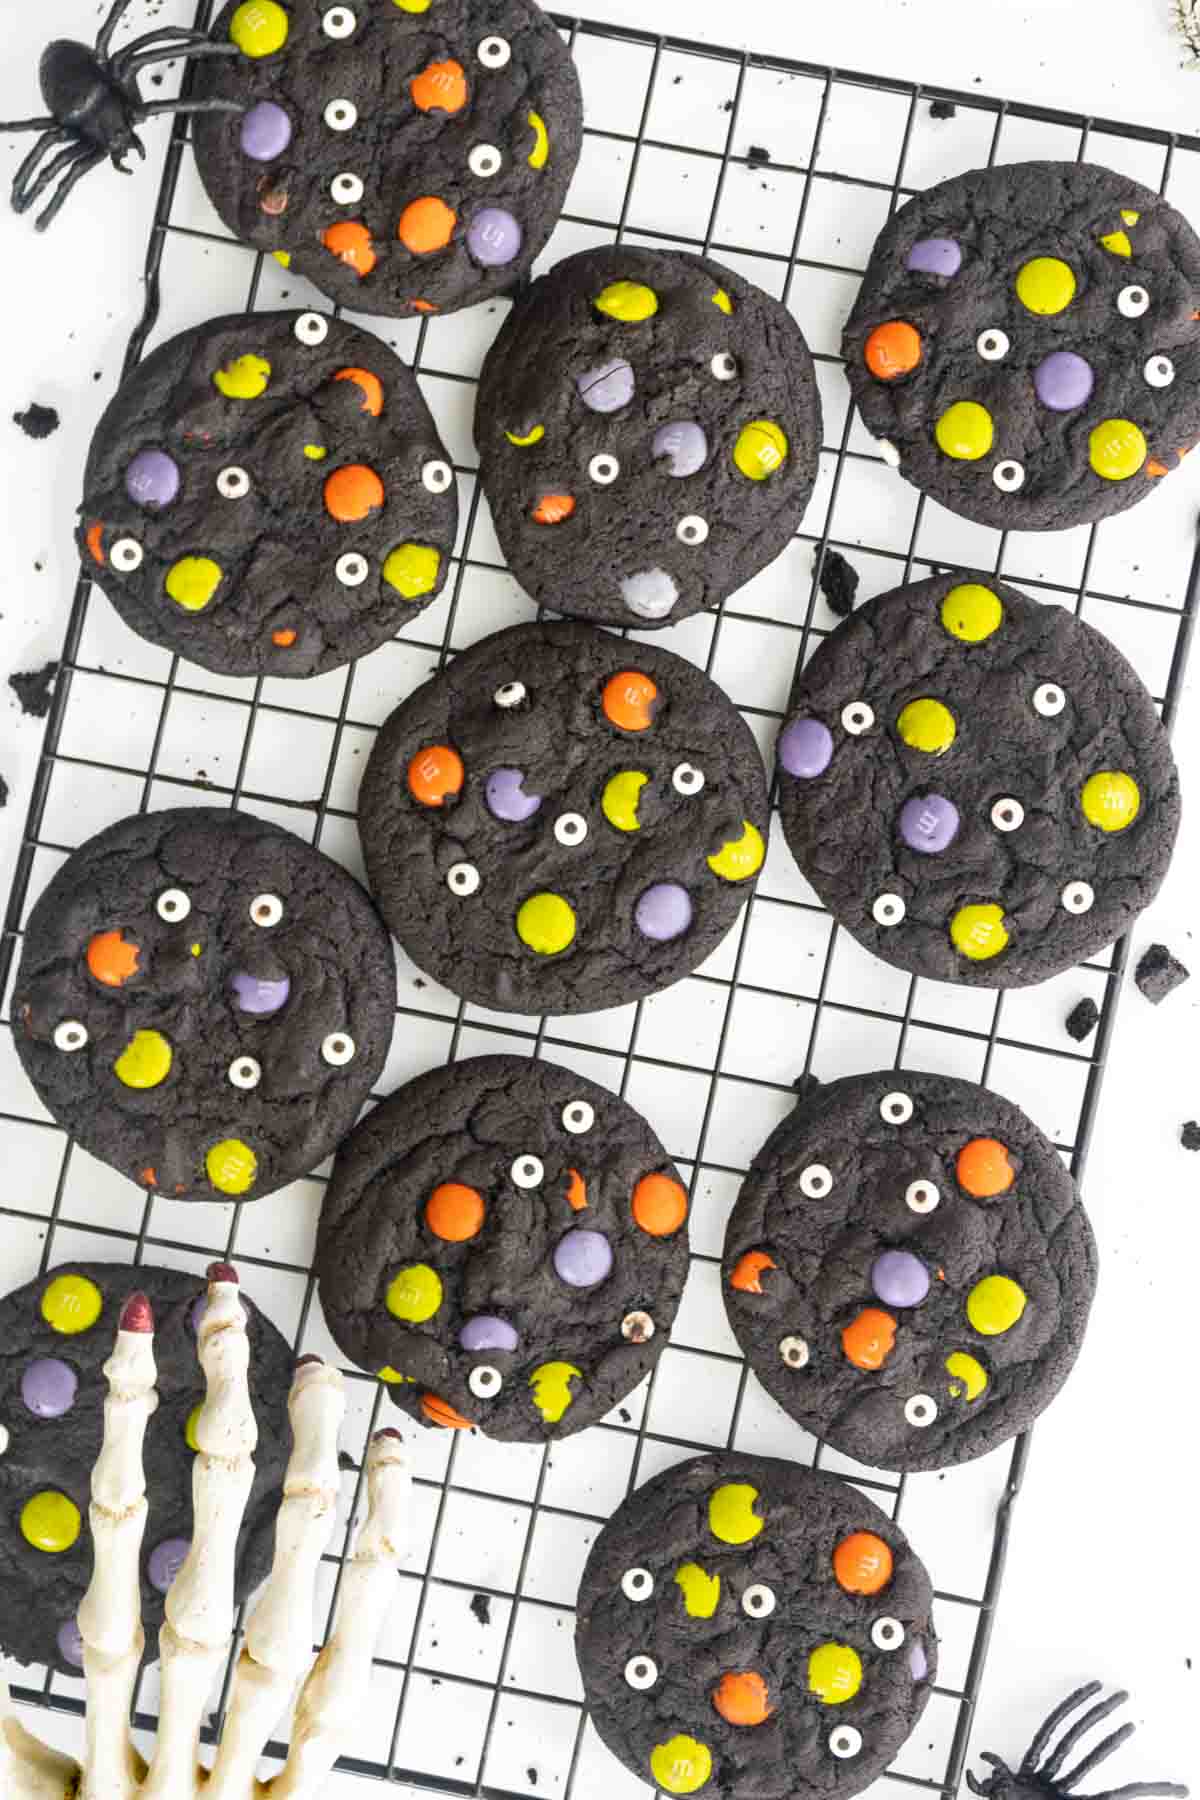 black cocoa Halloween cookies topped with colorful M&M's and candy eyeballs on a baking rack.